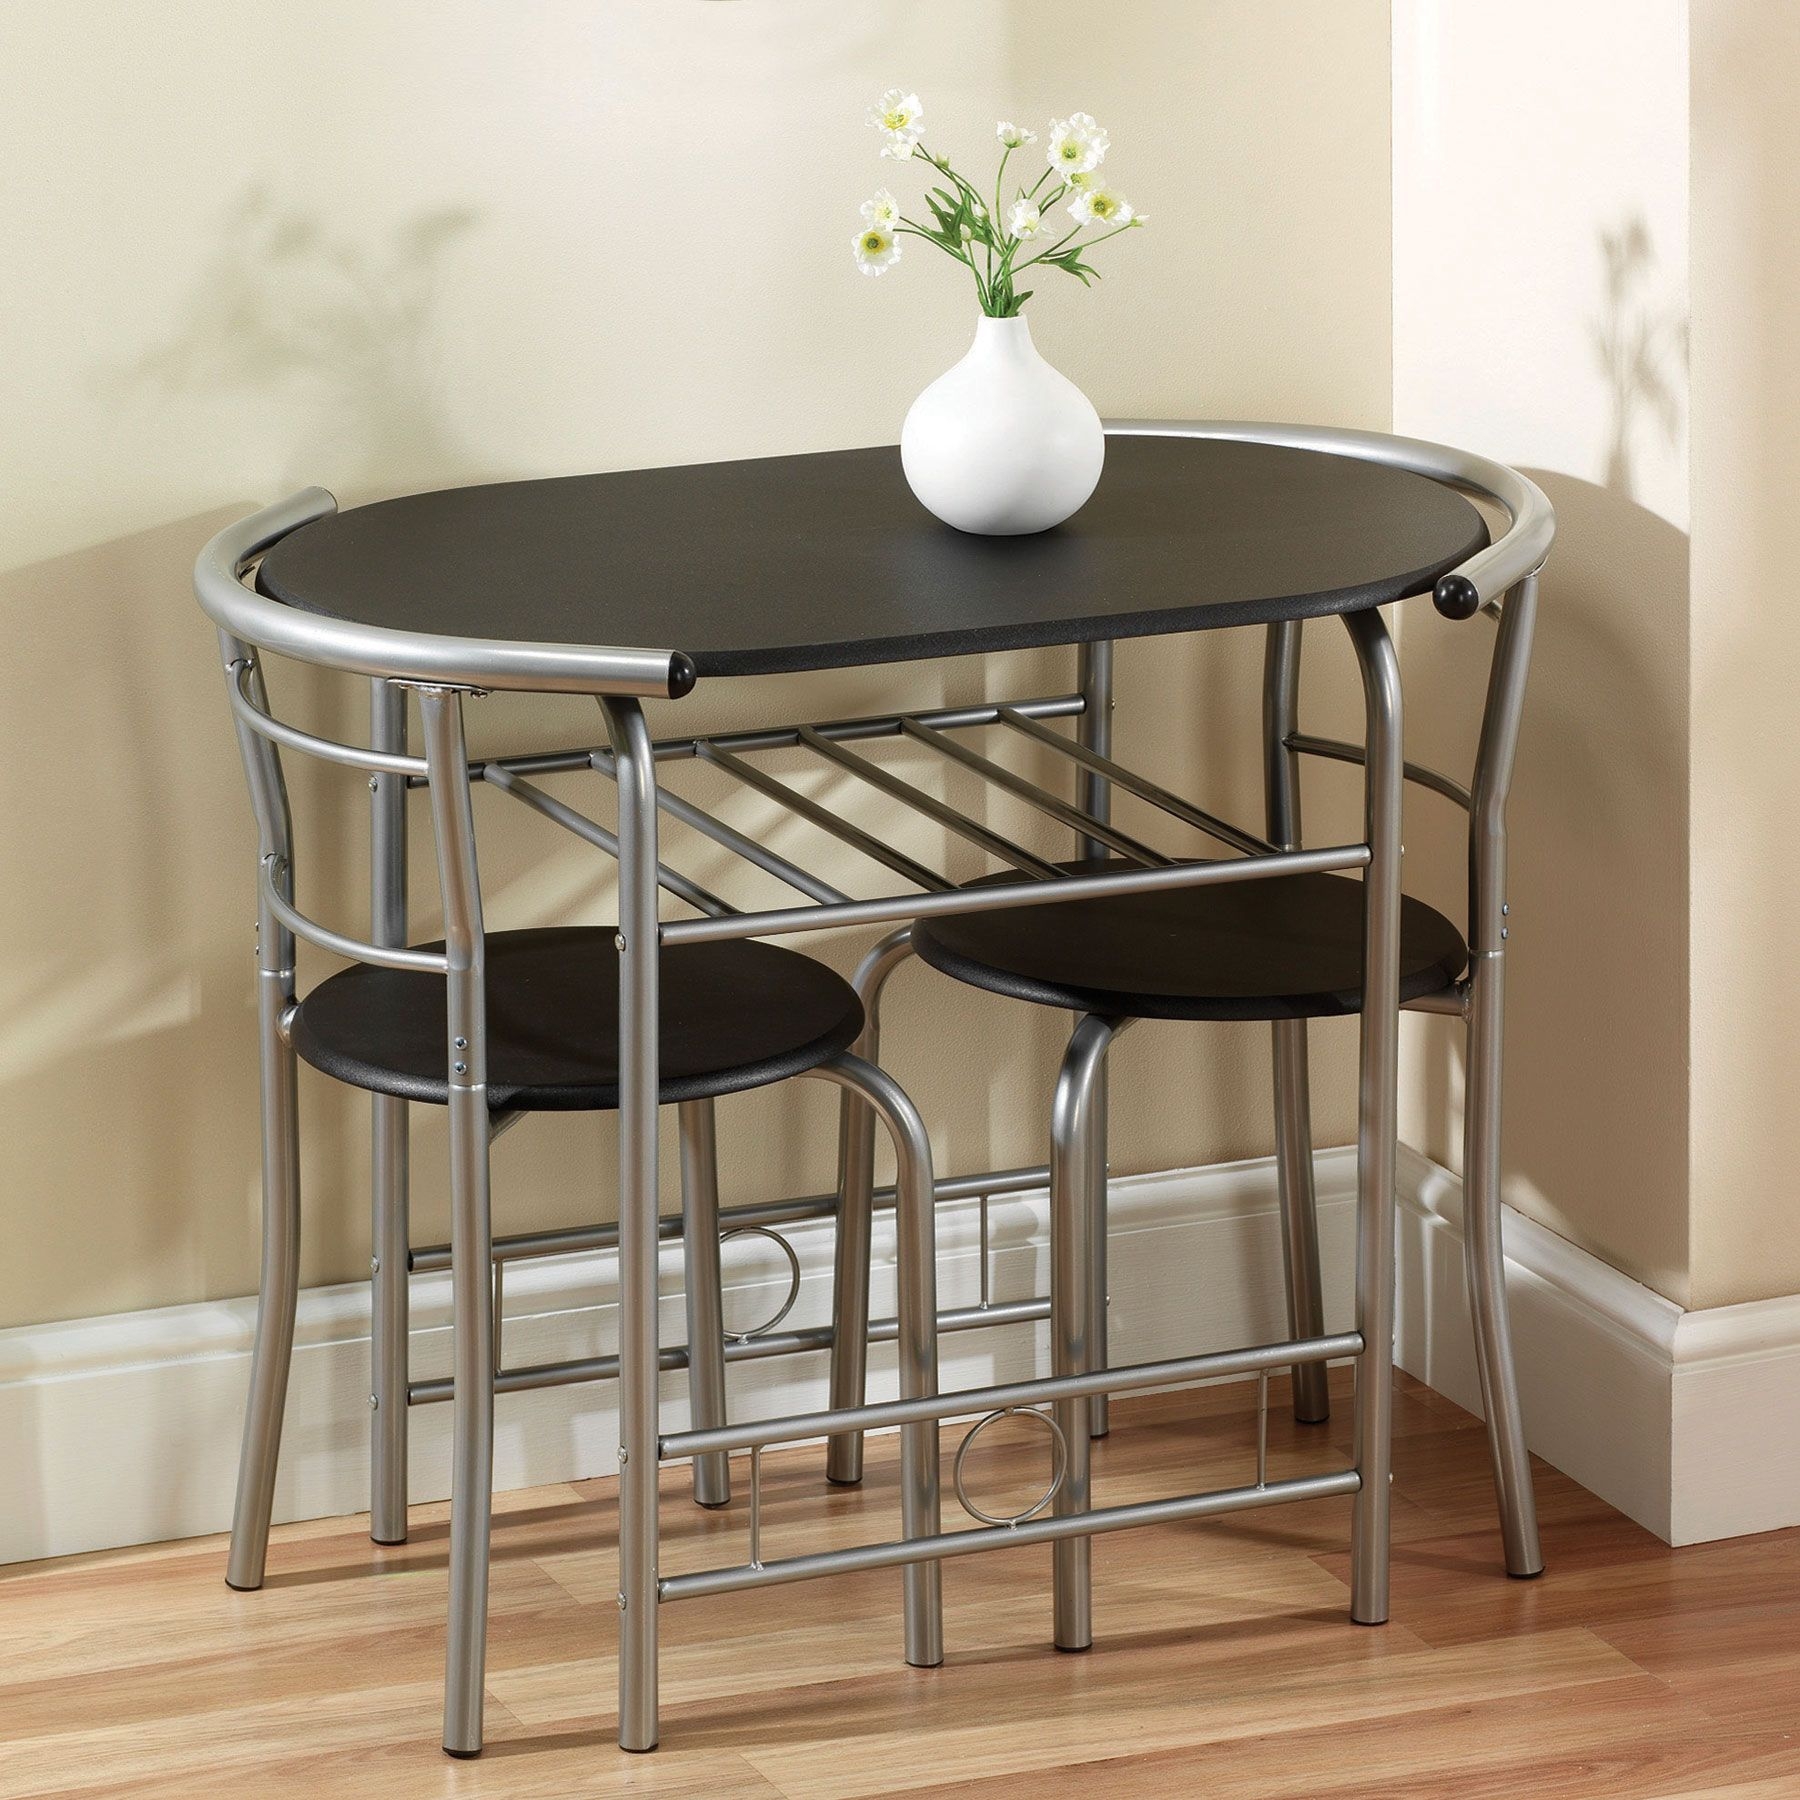 Space Saving Table And Chairs Visualhunt, Small Dining Room Table 4 Chairs